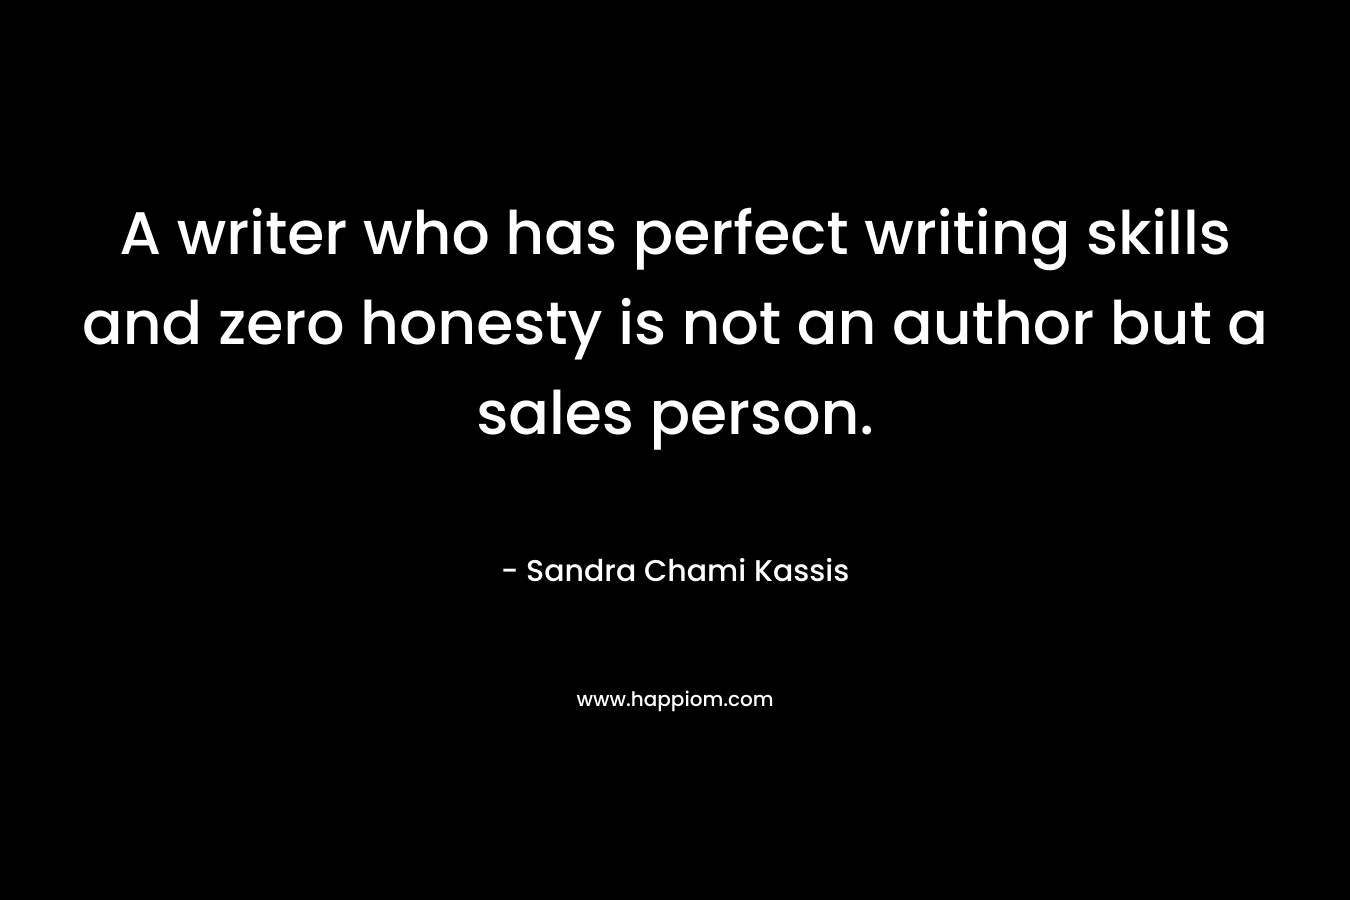 A writer who has perfect writing skills and zero honesty is not an author but a sales person. – Sandra Chami Kassis